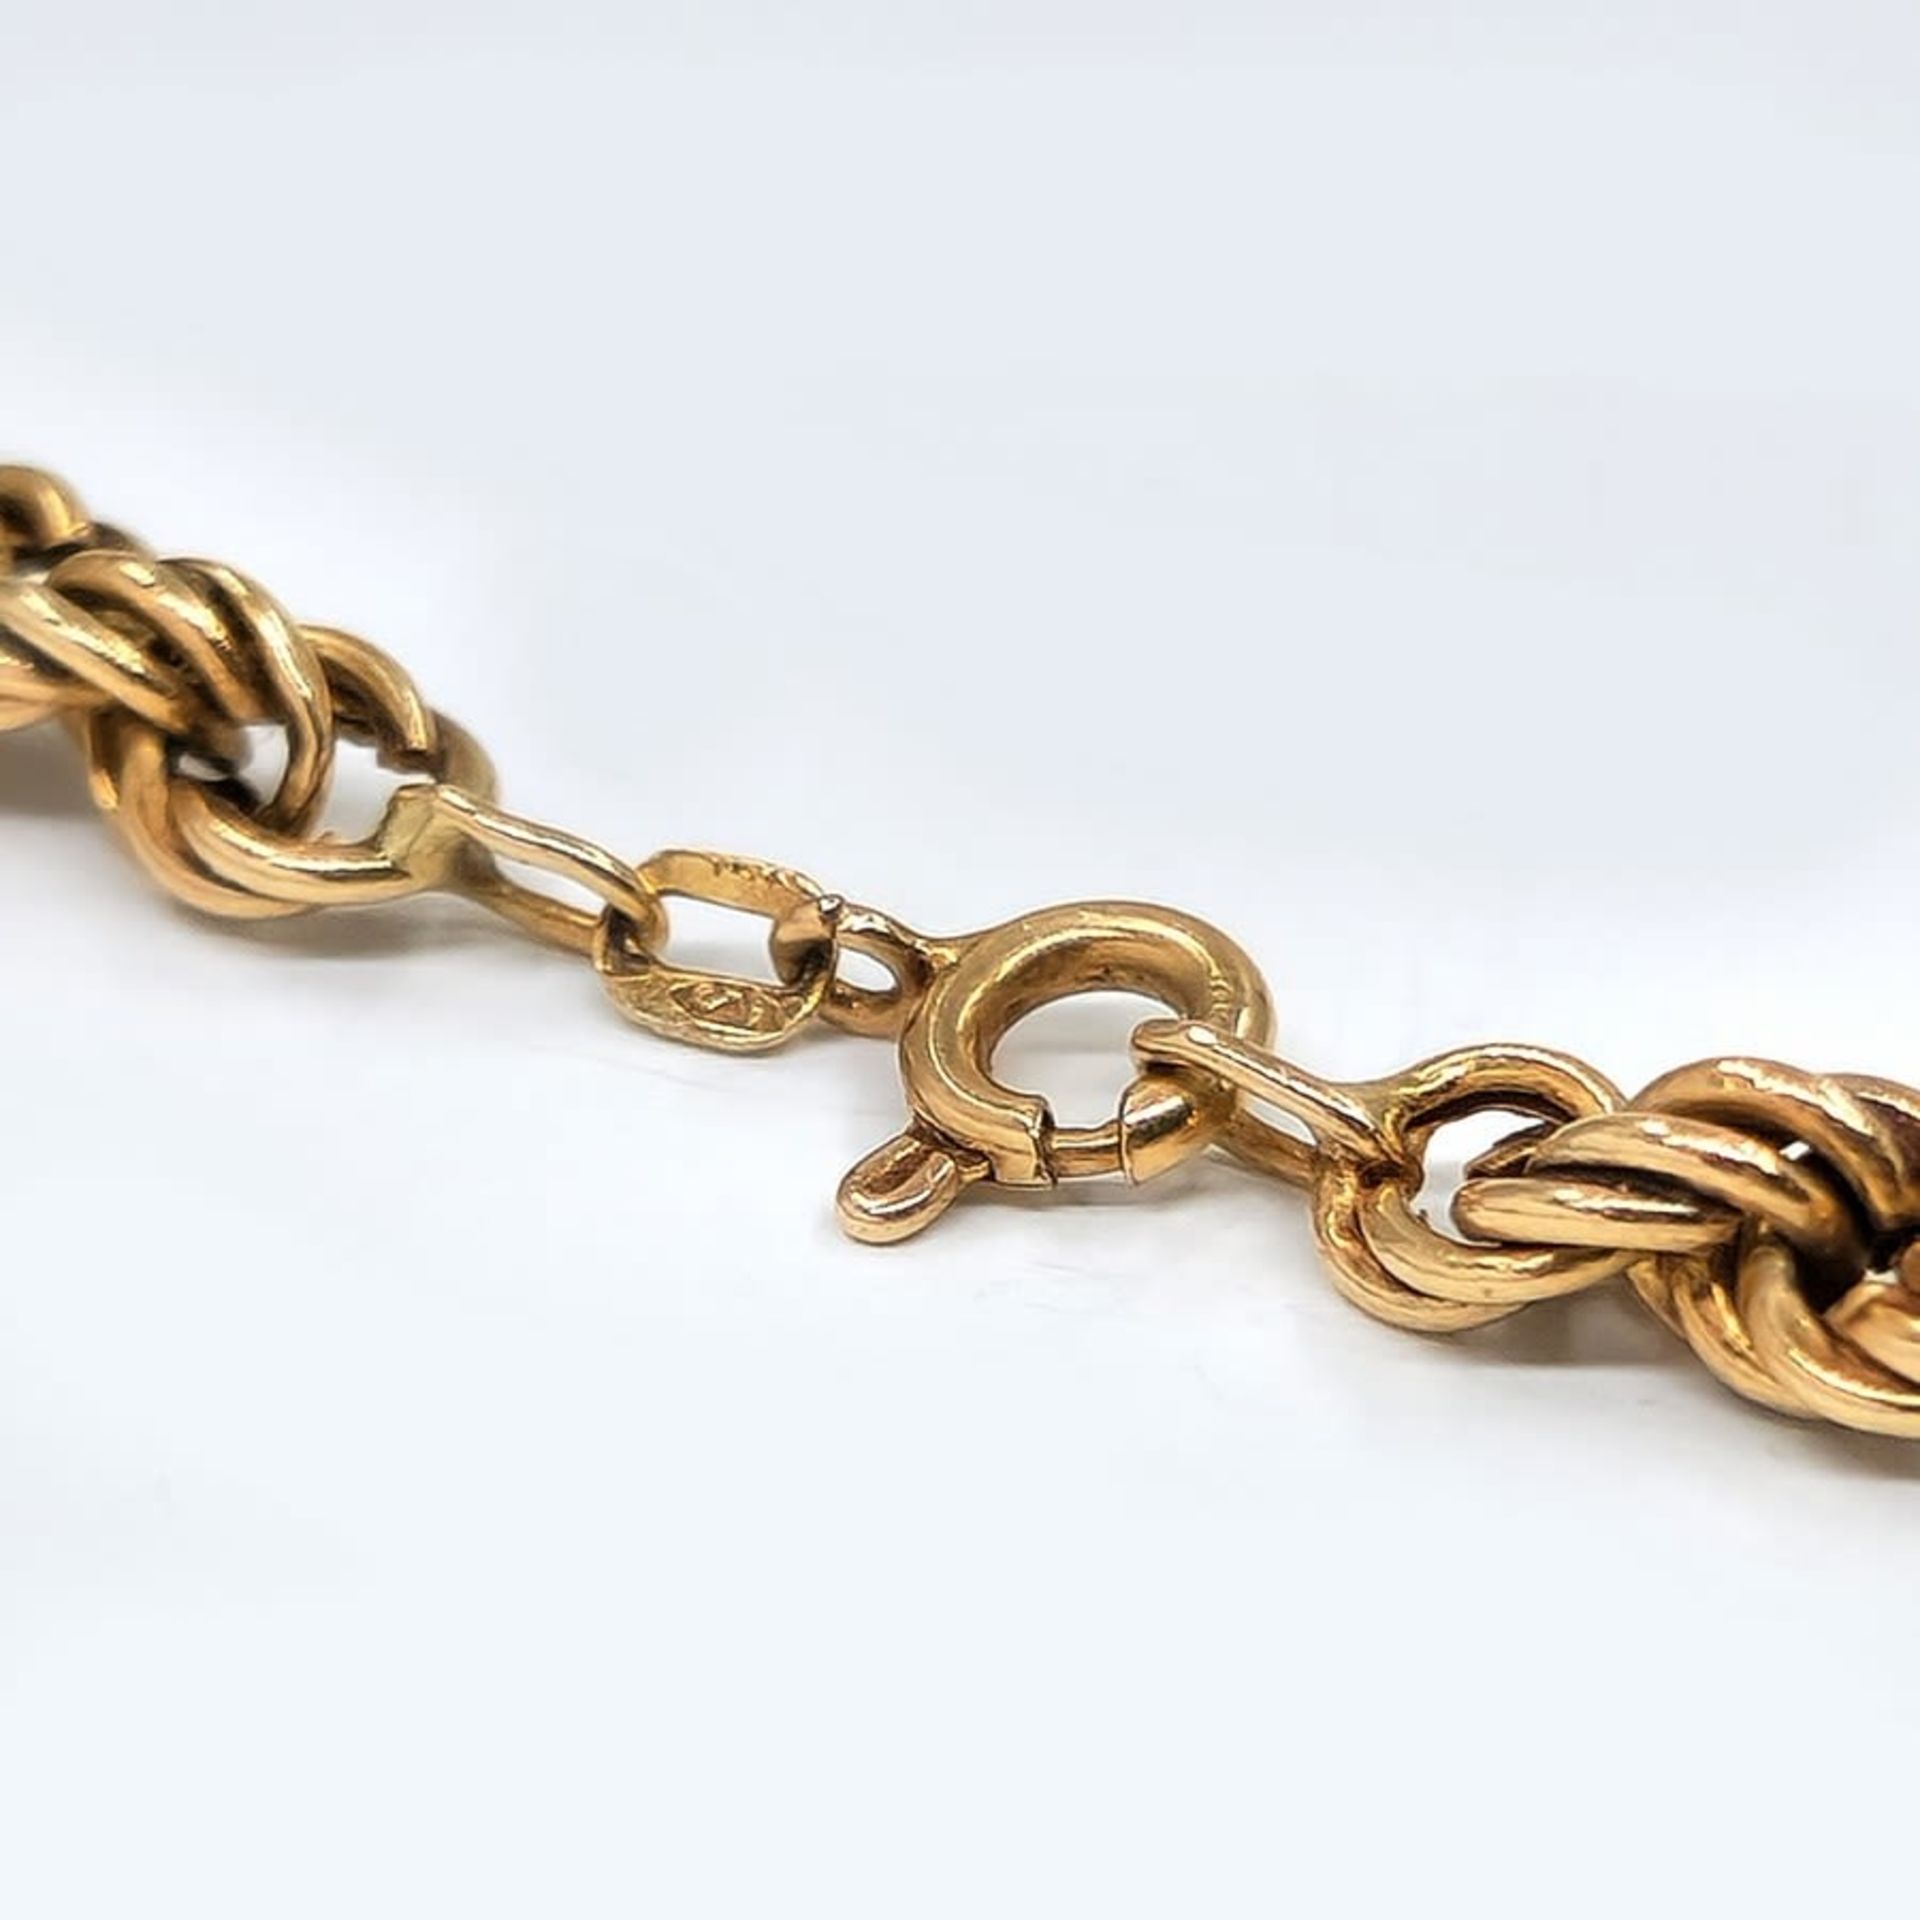 Necklace 14K yellow gold, signed, Length: 46 cm, Weight: 15.54 grams. - Image 3 of 3